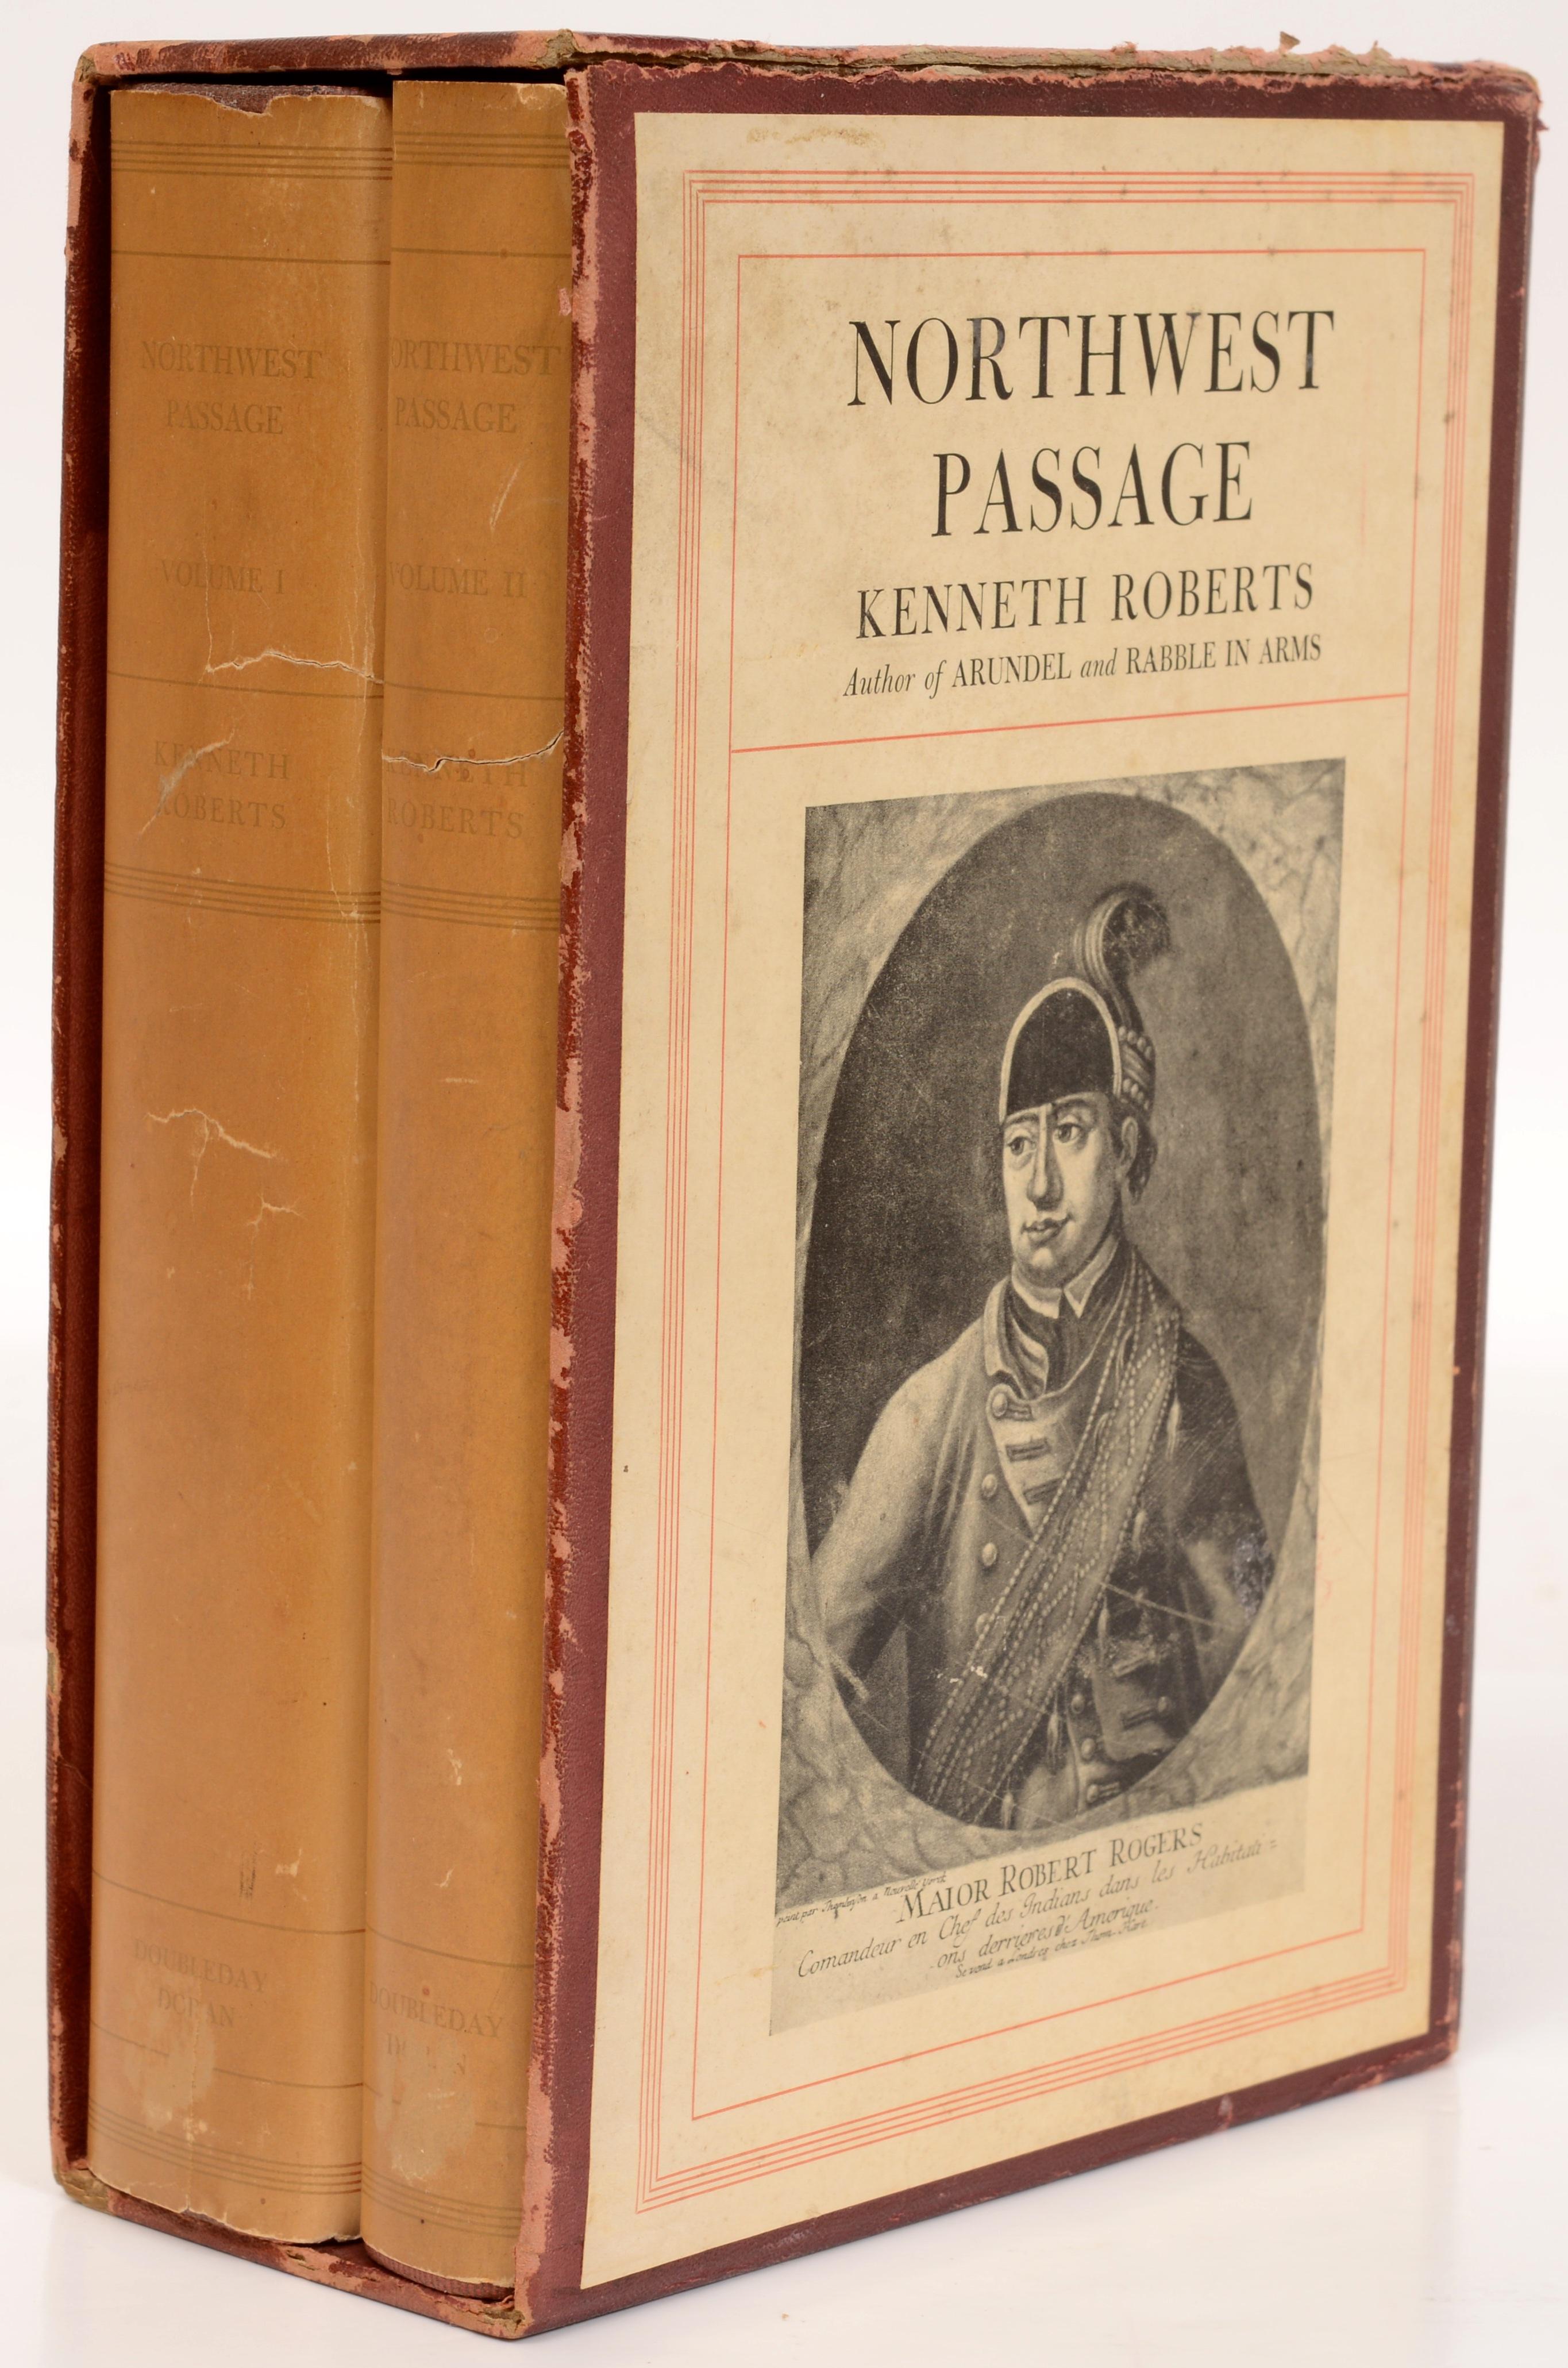 Northwest Passage, Limited 2 Volume Edition By Kenneth Roberts. Published by Doubleday, Doran & Company Inc., Garden City, N.Y., 1937. 1st Ed hardcovers with dust jacket and slipcase. From Nelson Doubleday's estate. This is copy #2/1050 signed by